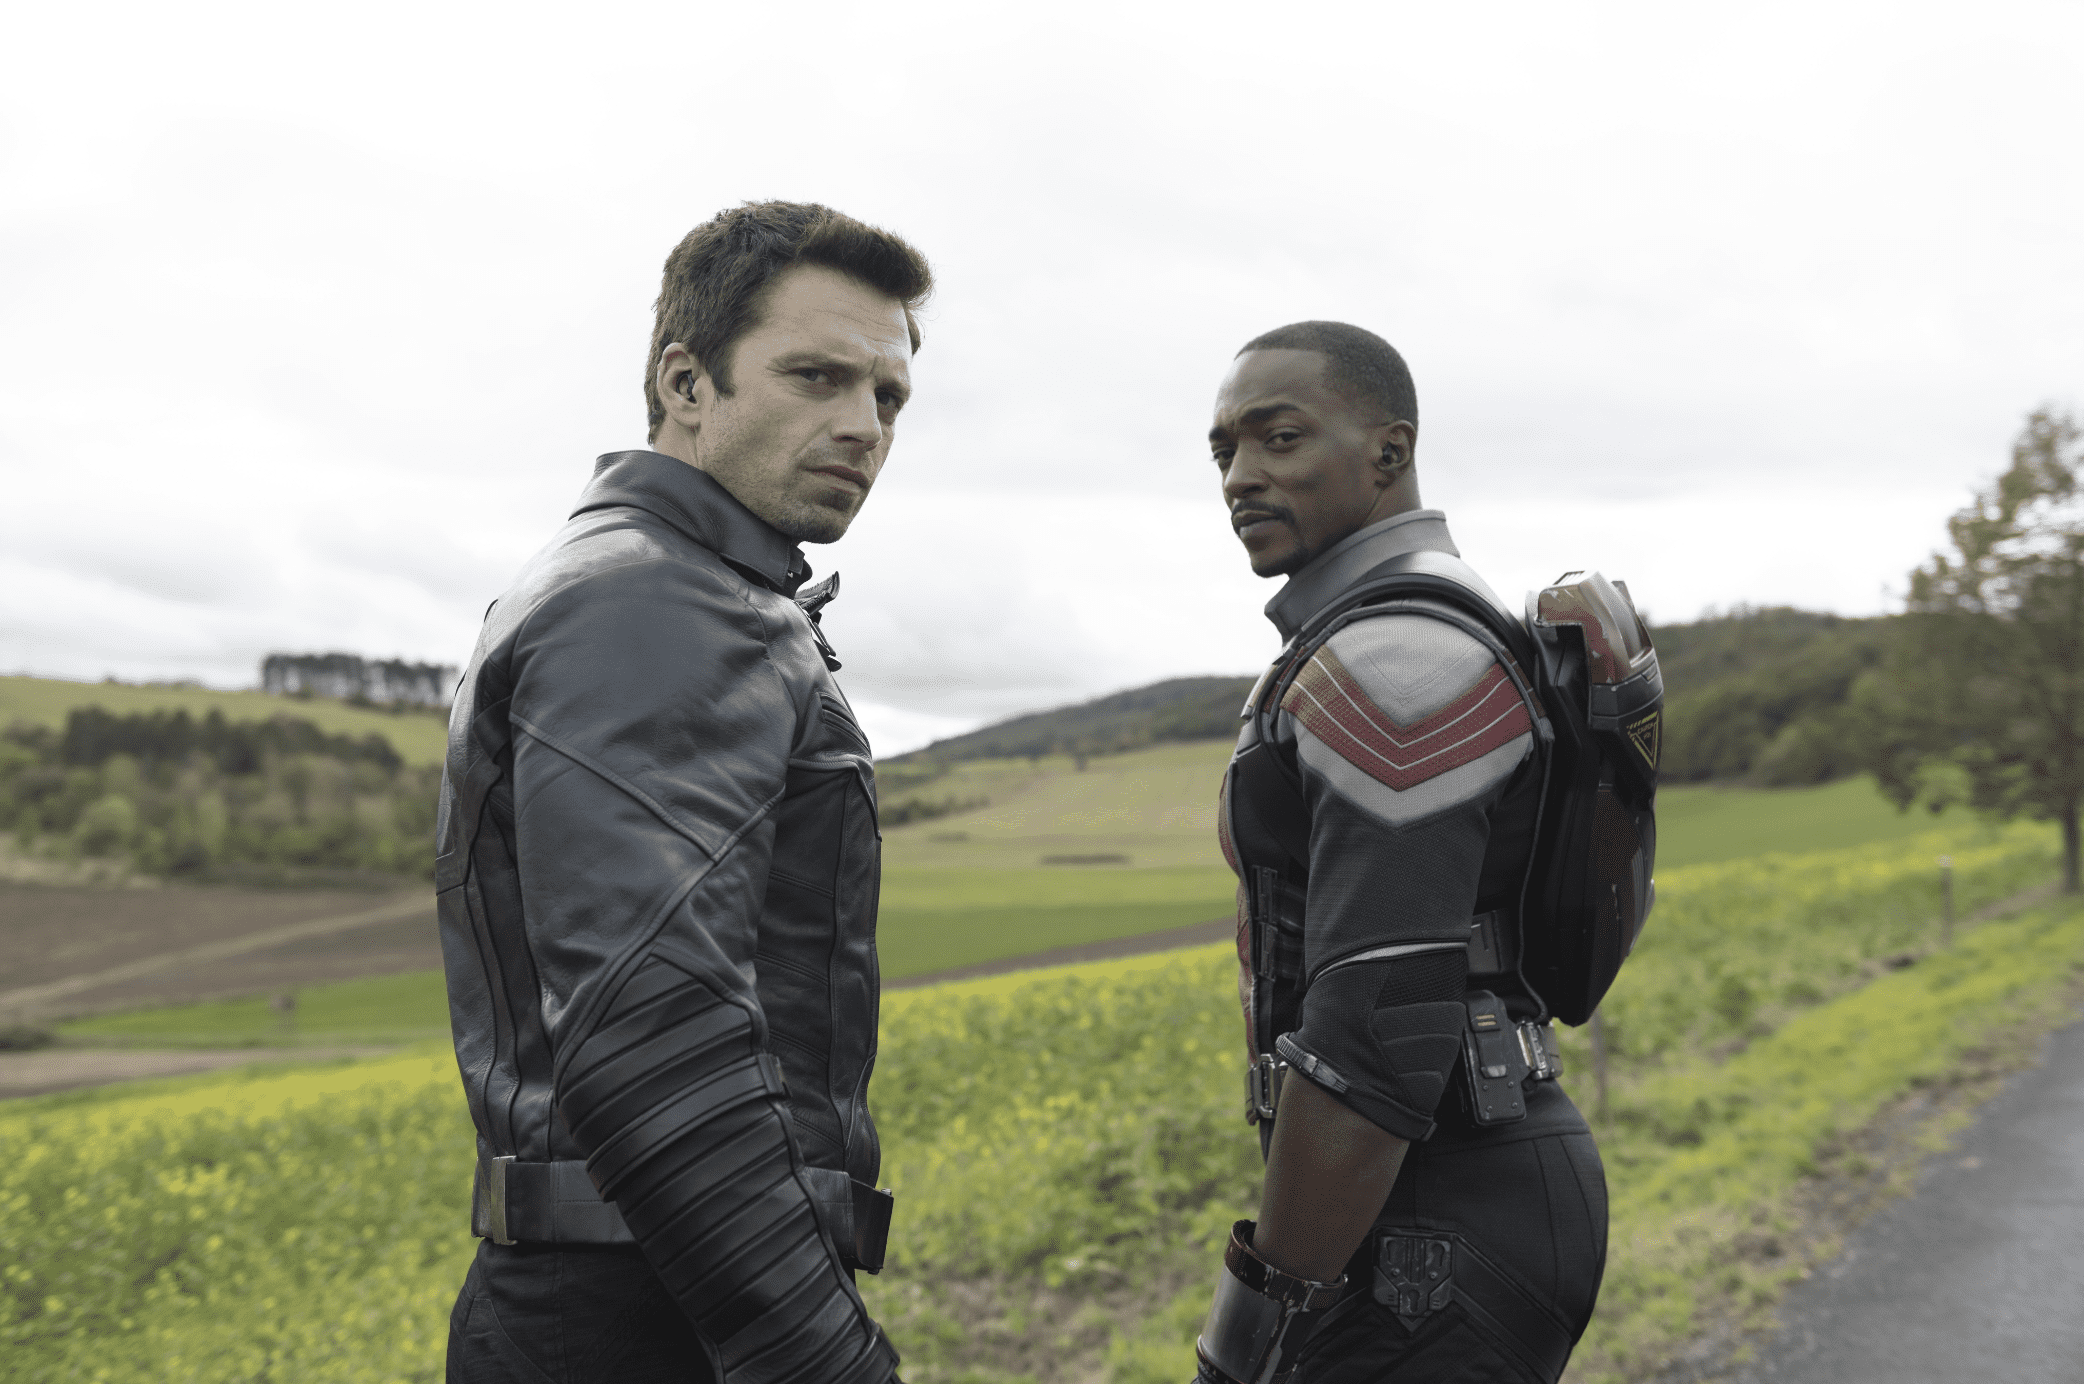 Bucky and Sam teaming up to track down a rogue group called the Skull Crushers